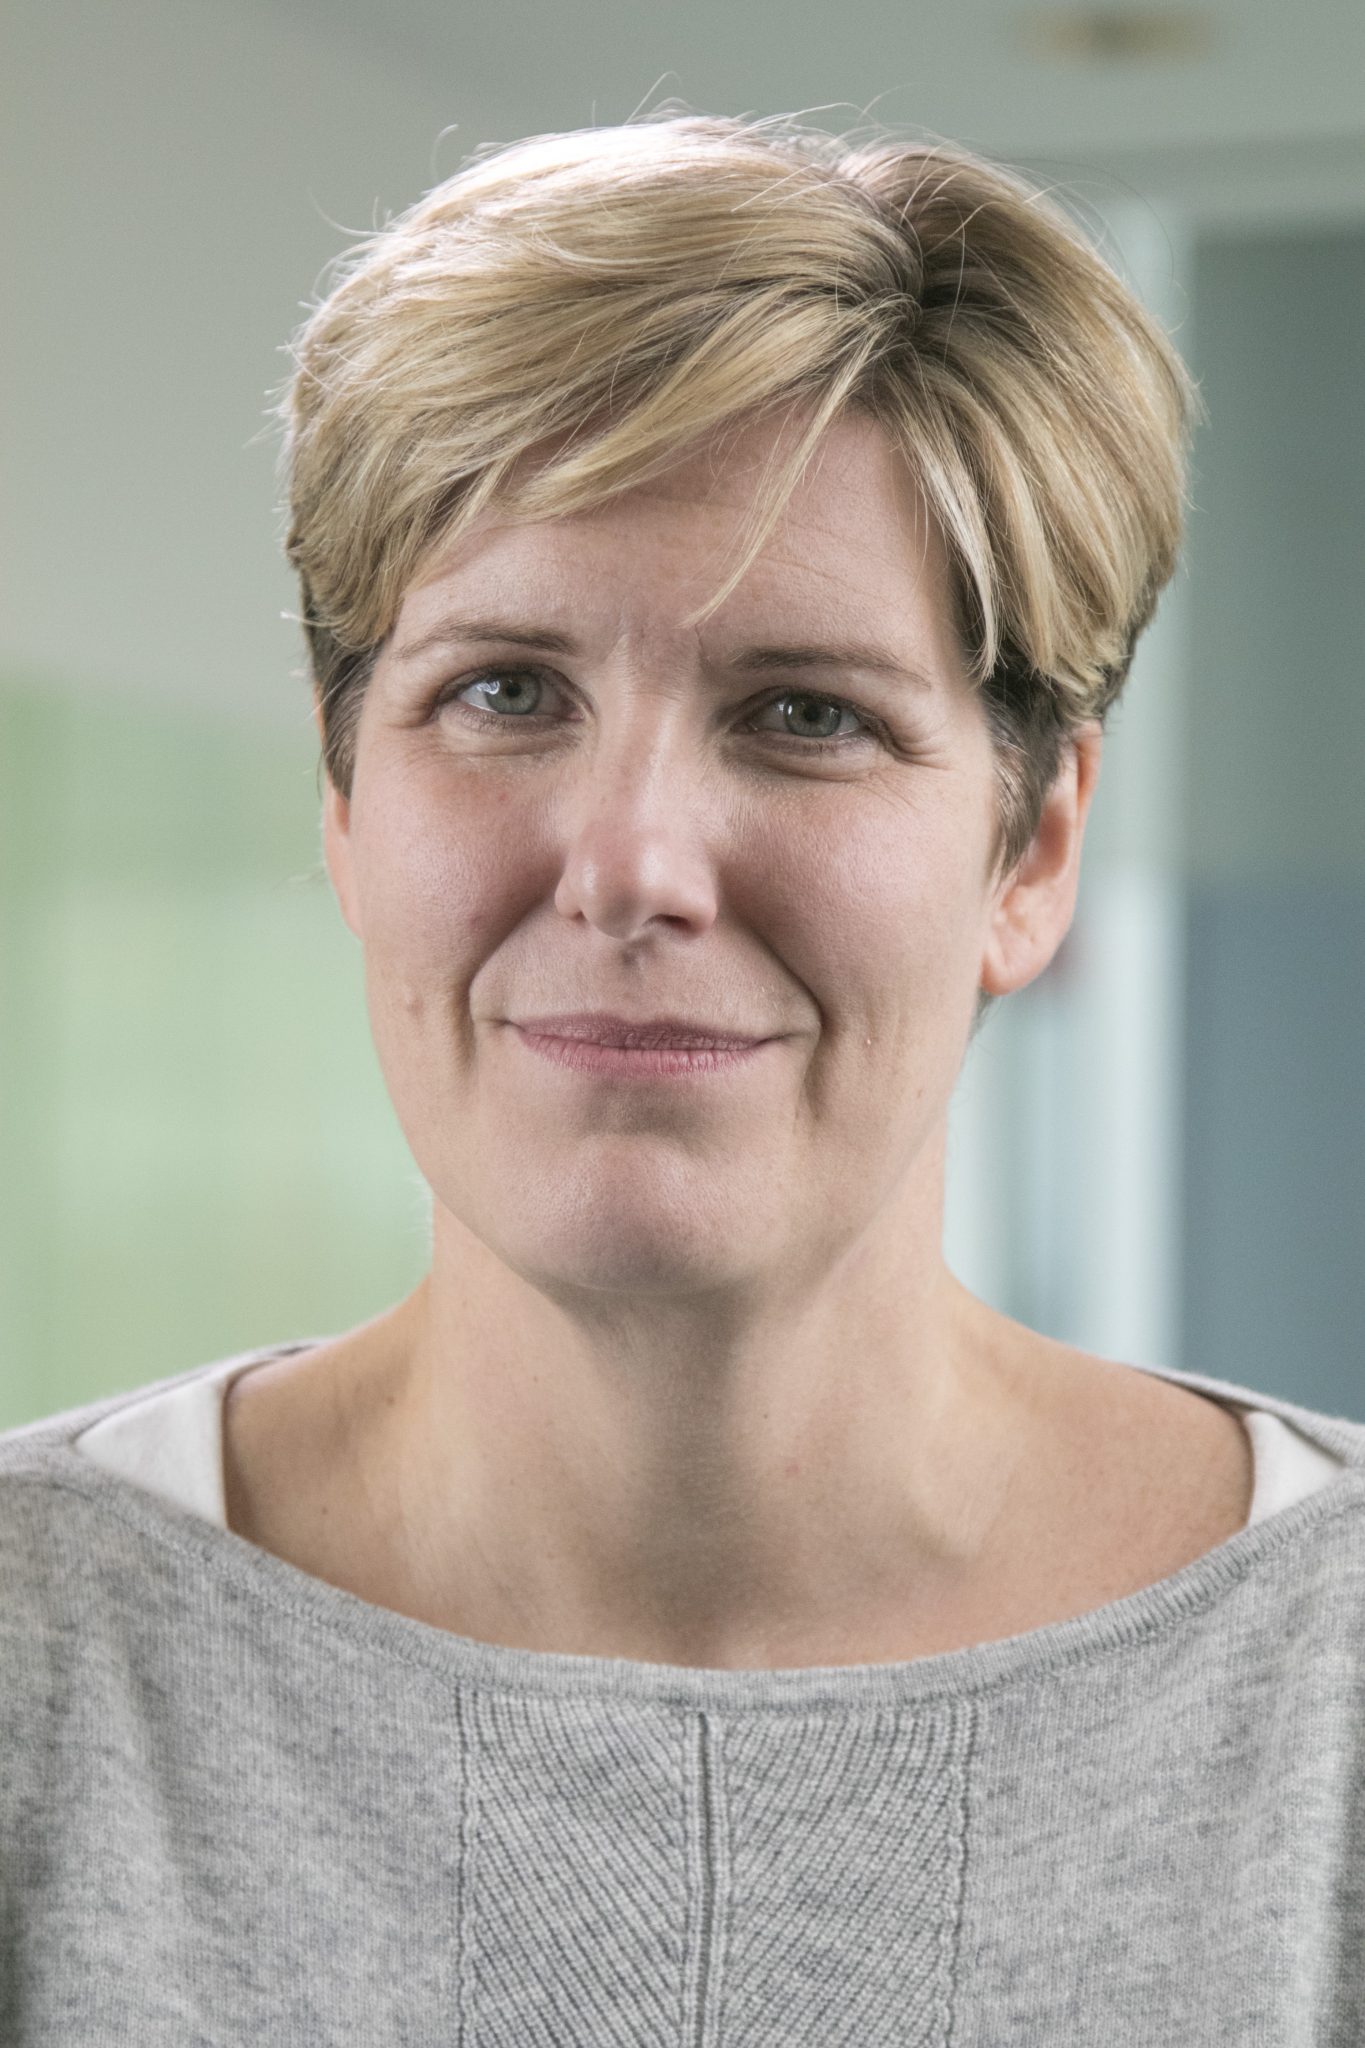 Becky Moffat, head of personal banking and advice at HSBC